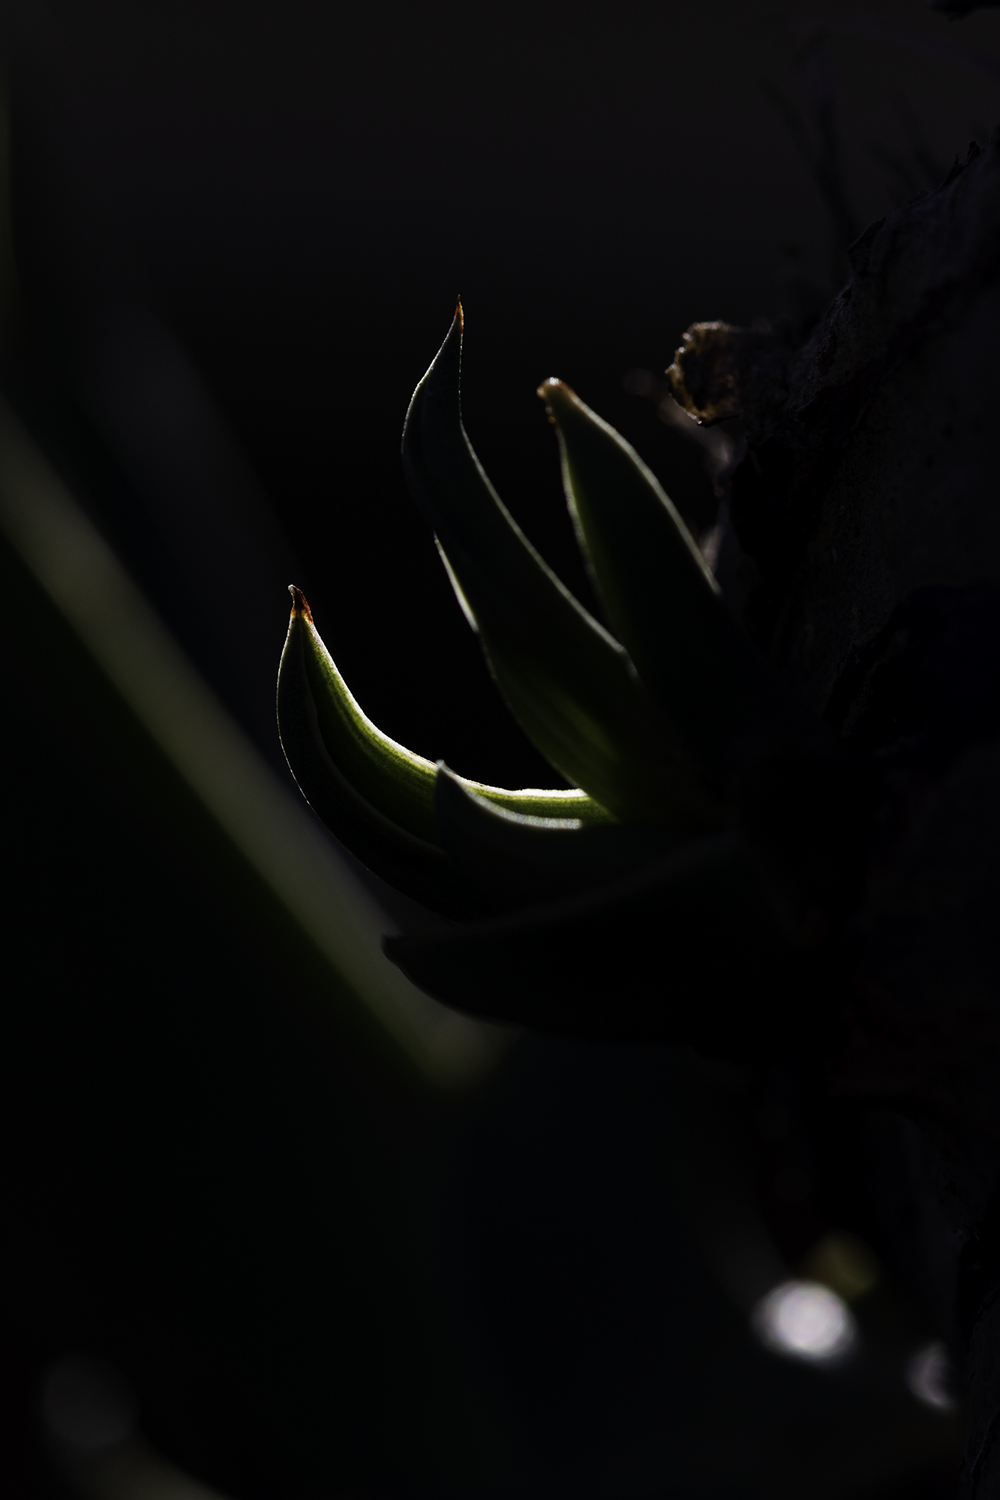 Colour photograph of plant detail with dark shadows.